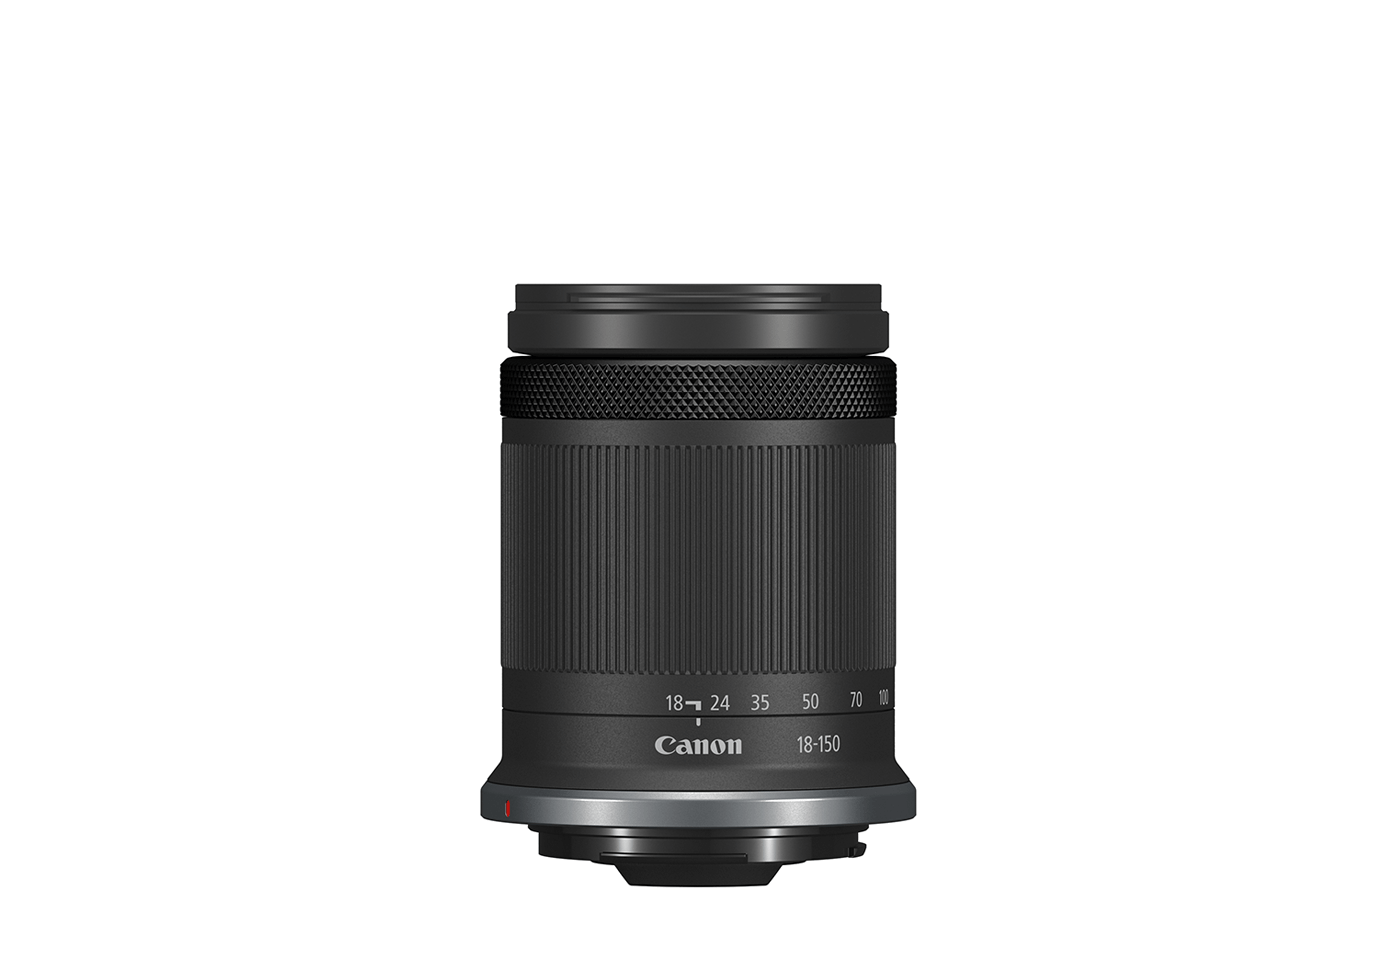 Front profile image of the RF-S 18-150mm f/3.5-6.3 IS STM standard zoom lens